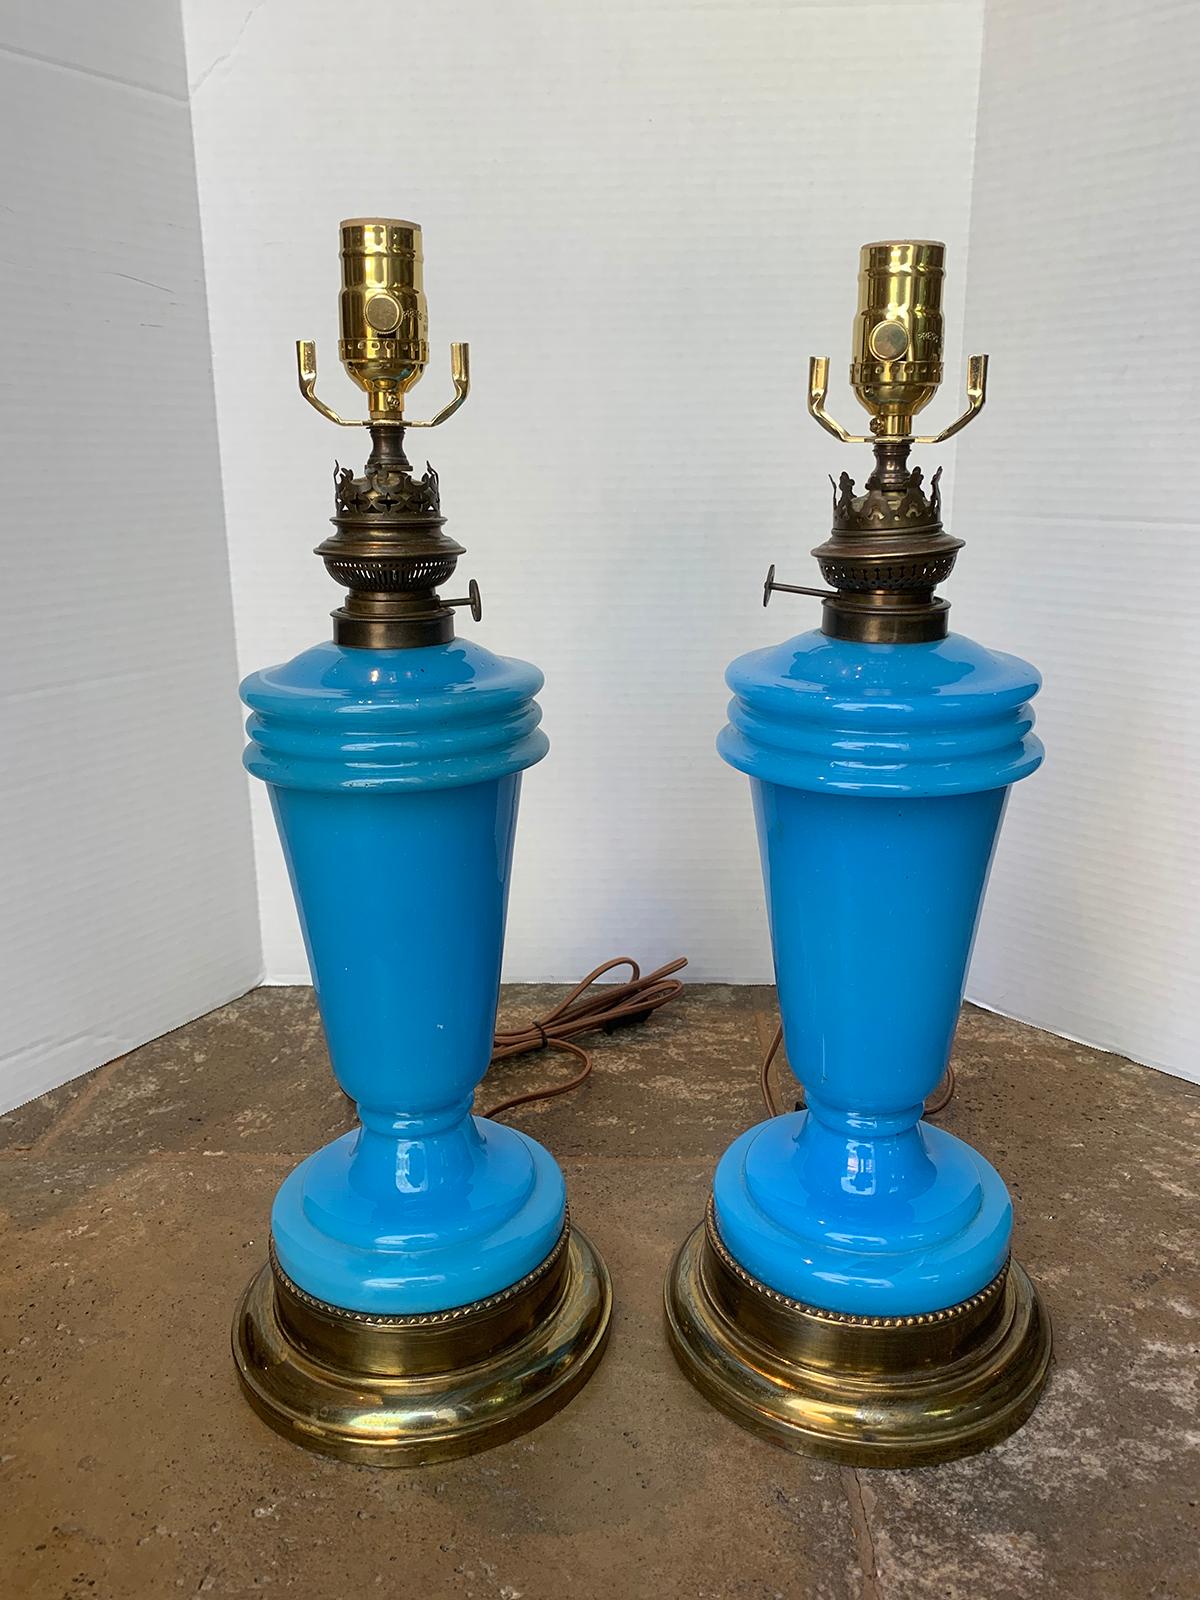 Pair of 19th Century French Opaline Glass Lamps, formerly oil
New wiring